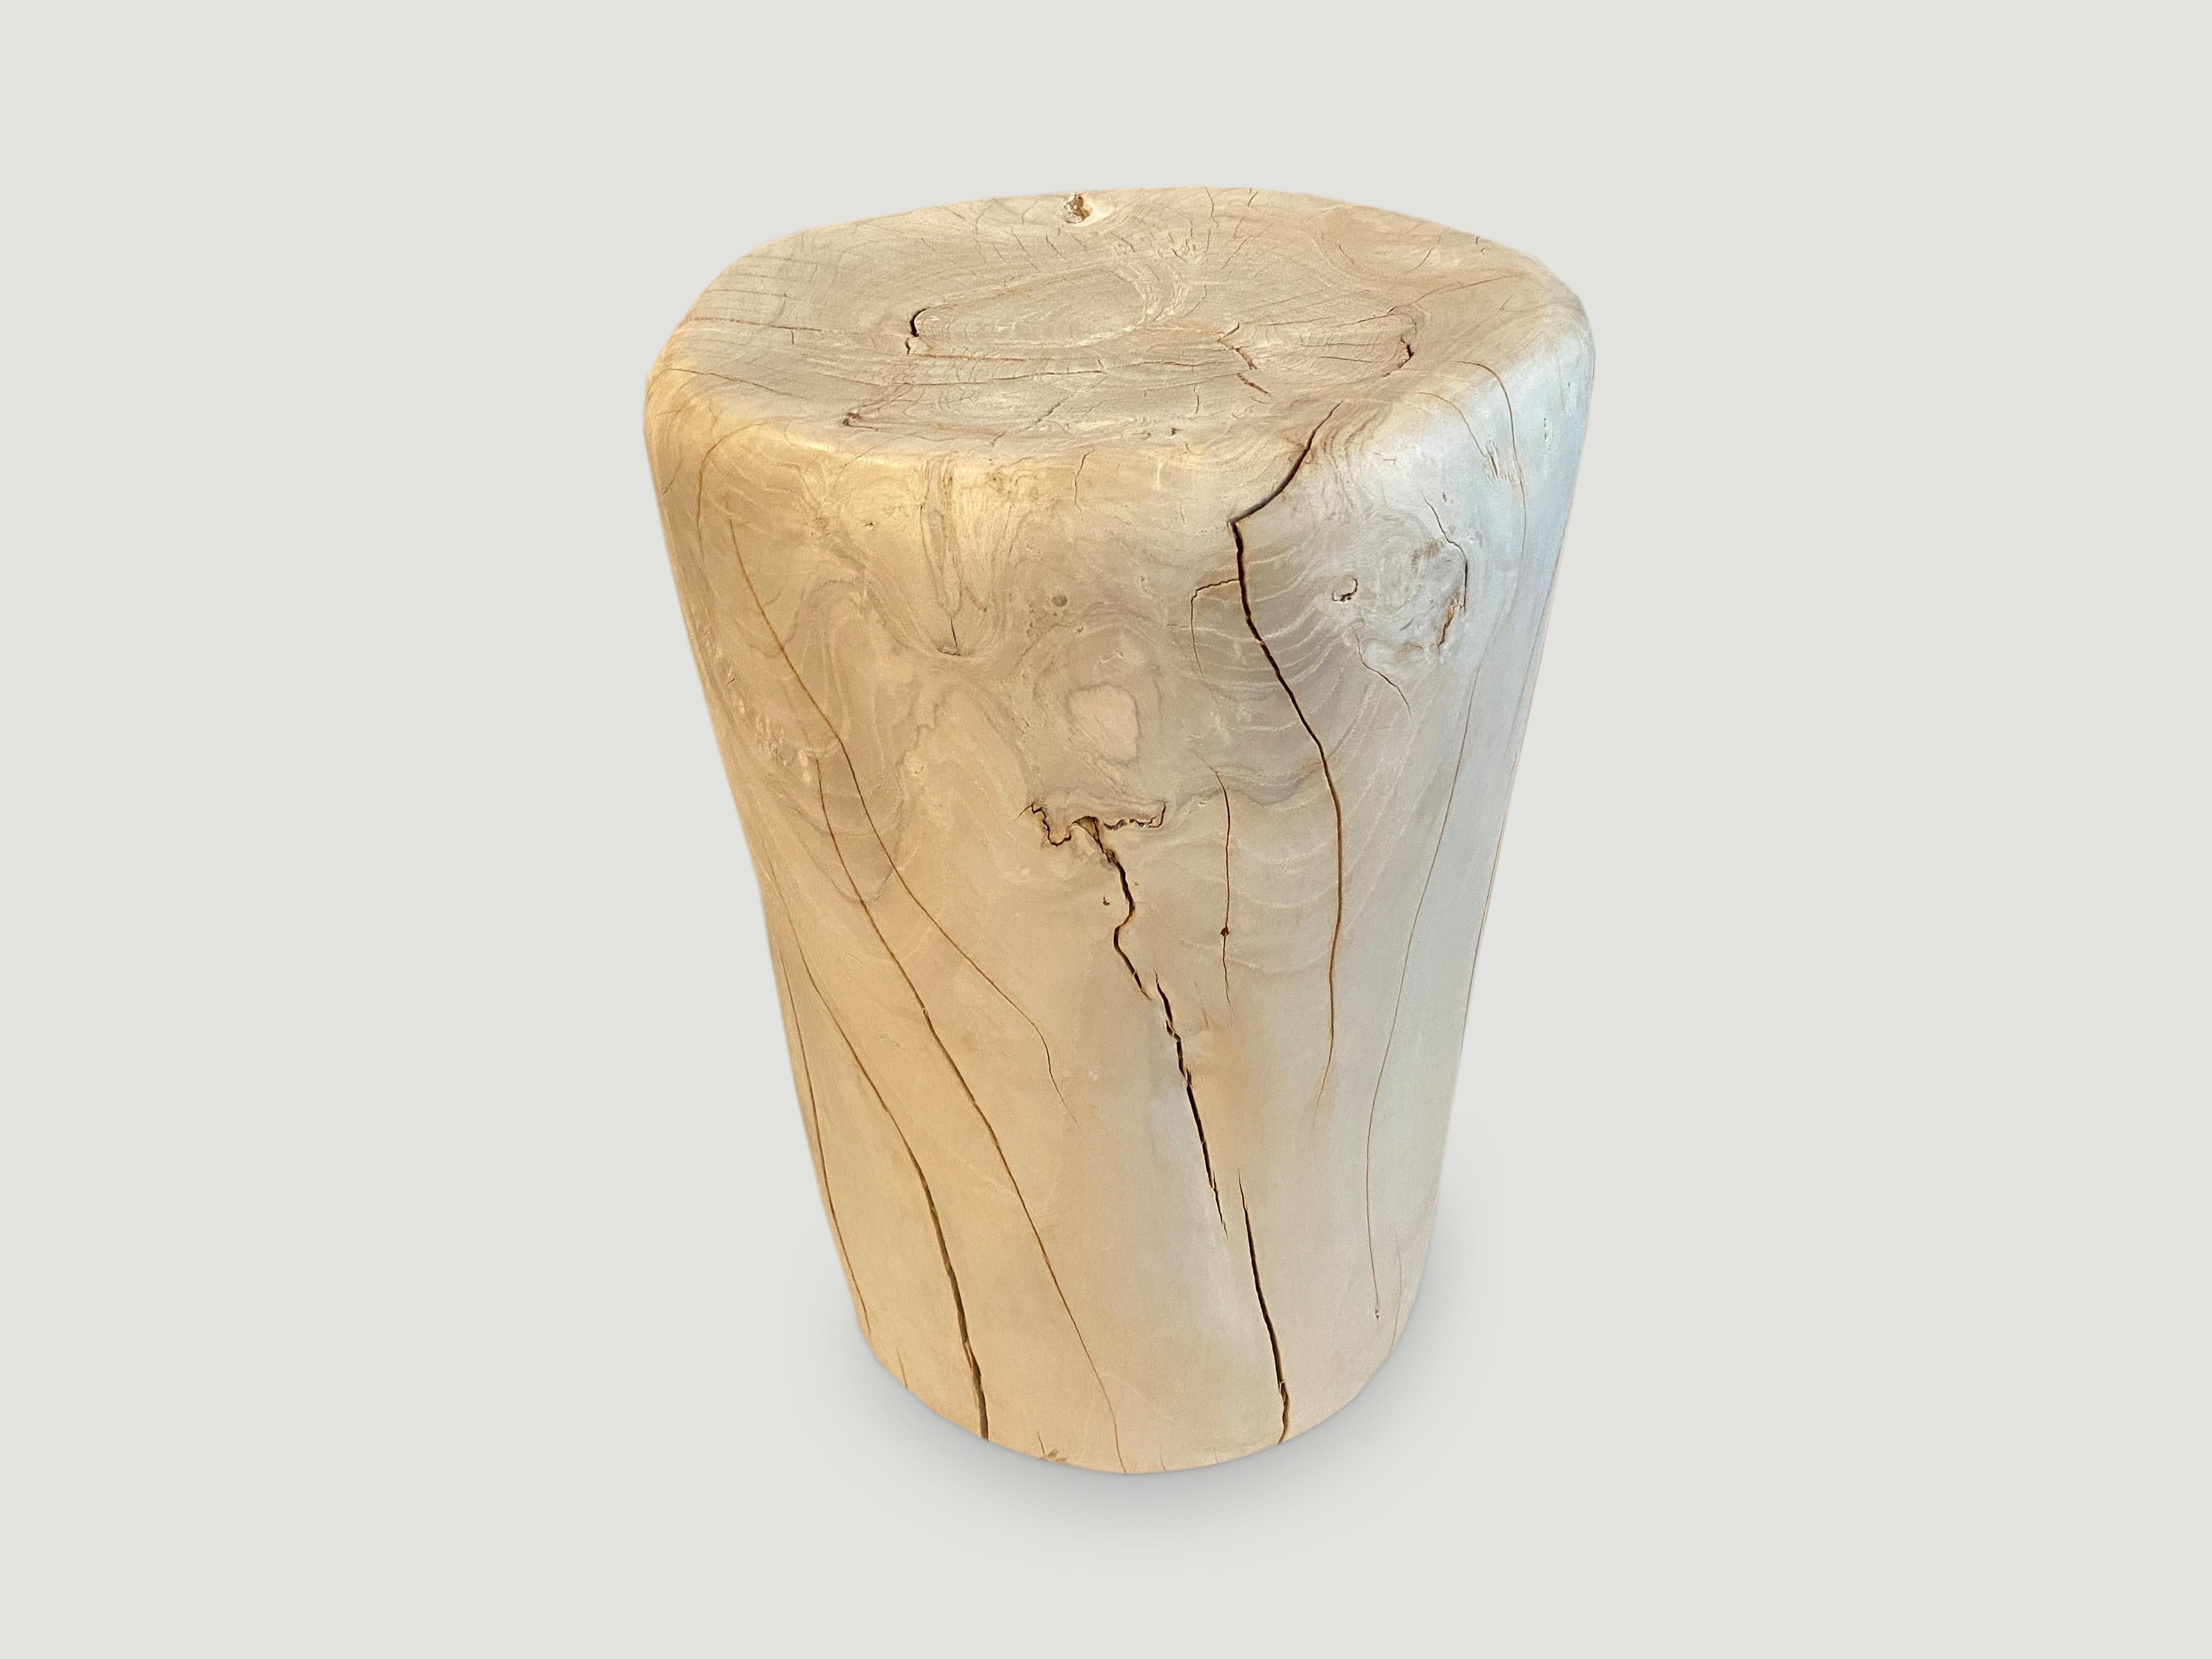 Reclaimed teak wood side table or stool. Hand carved into a drum shape whilst respecting the natural organic wood. Bleached to a bone finish. We have a collection. All unique. The price represents the one shown. Also available charred.

The St.